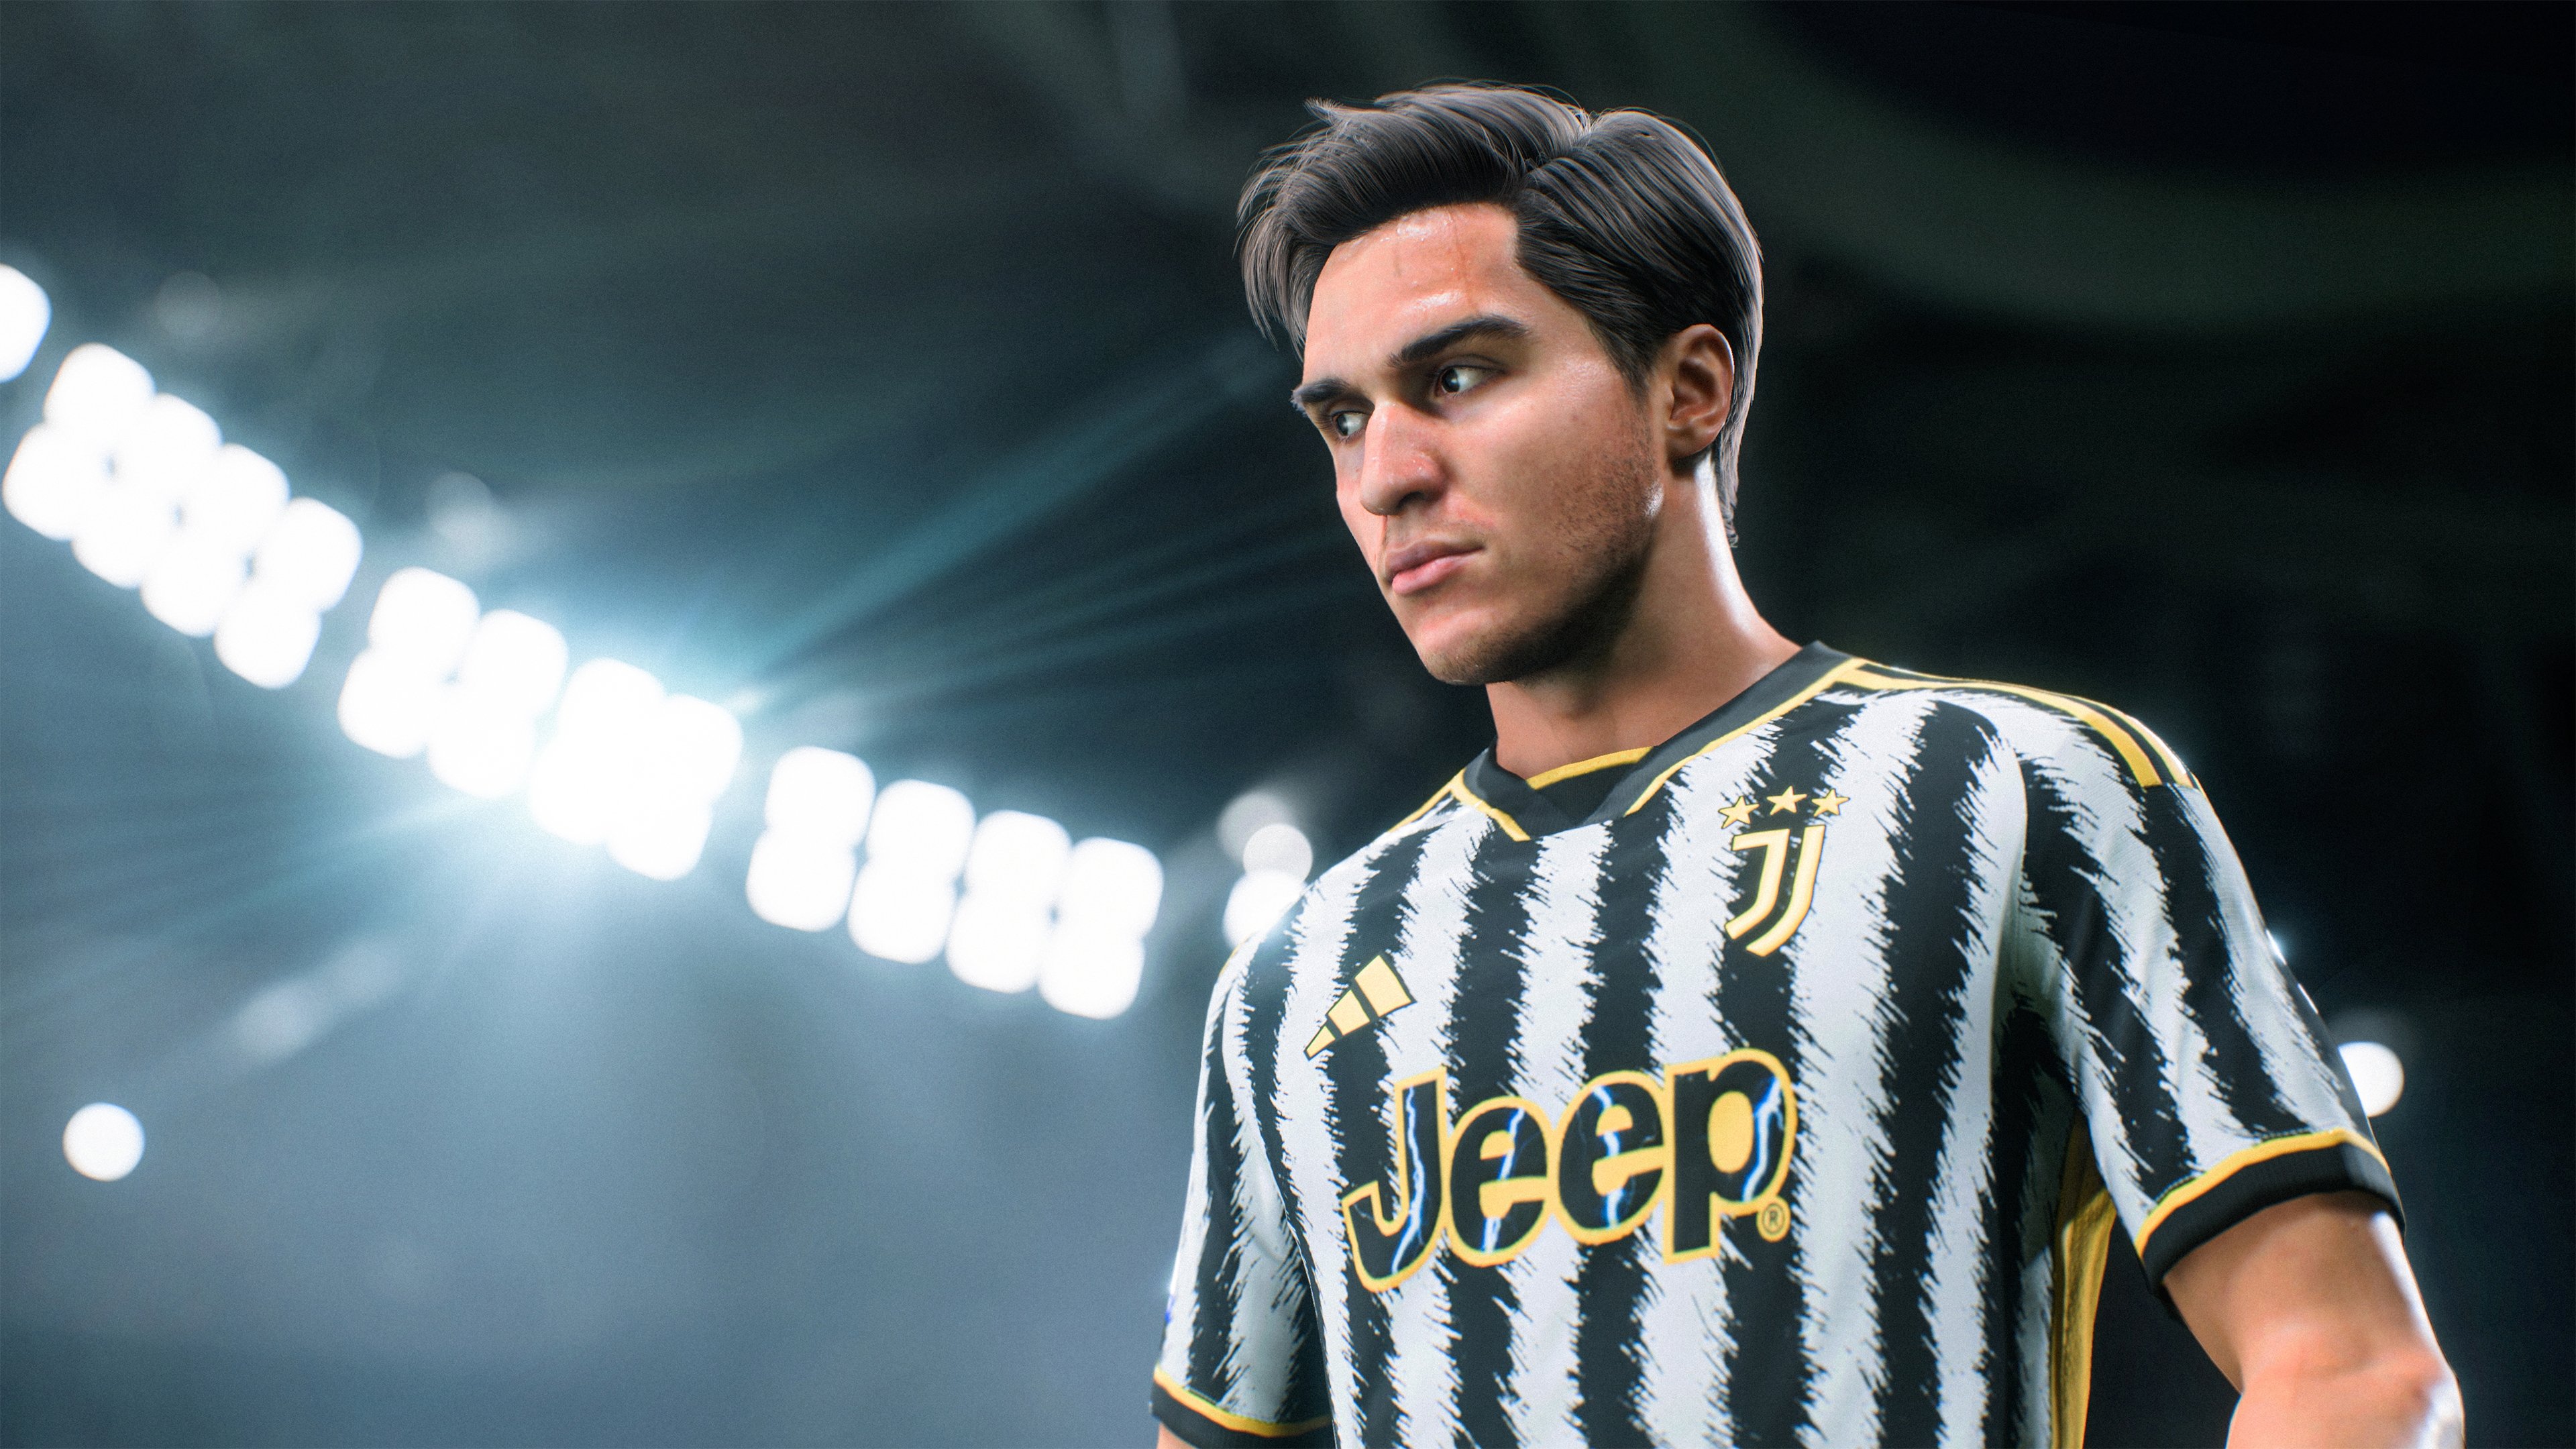 FIFA 23 reveals its PC requirements, and they are significantly higher than  those of FIFA 22 - Meristation